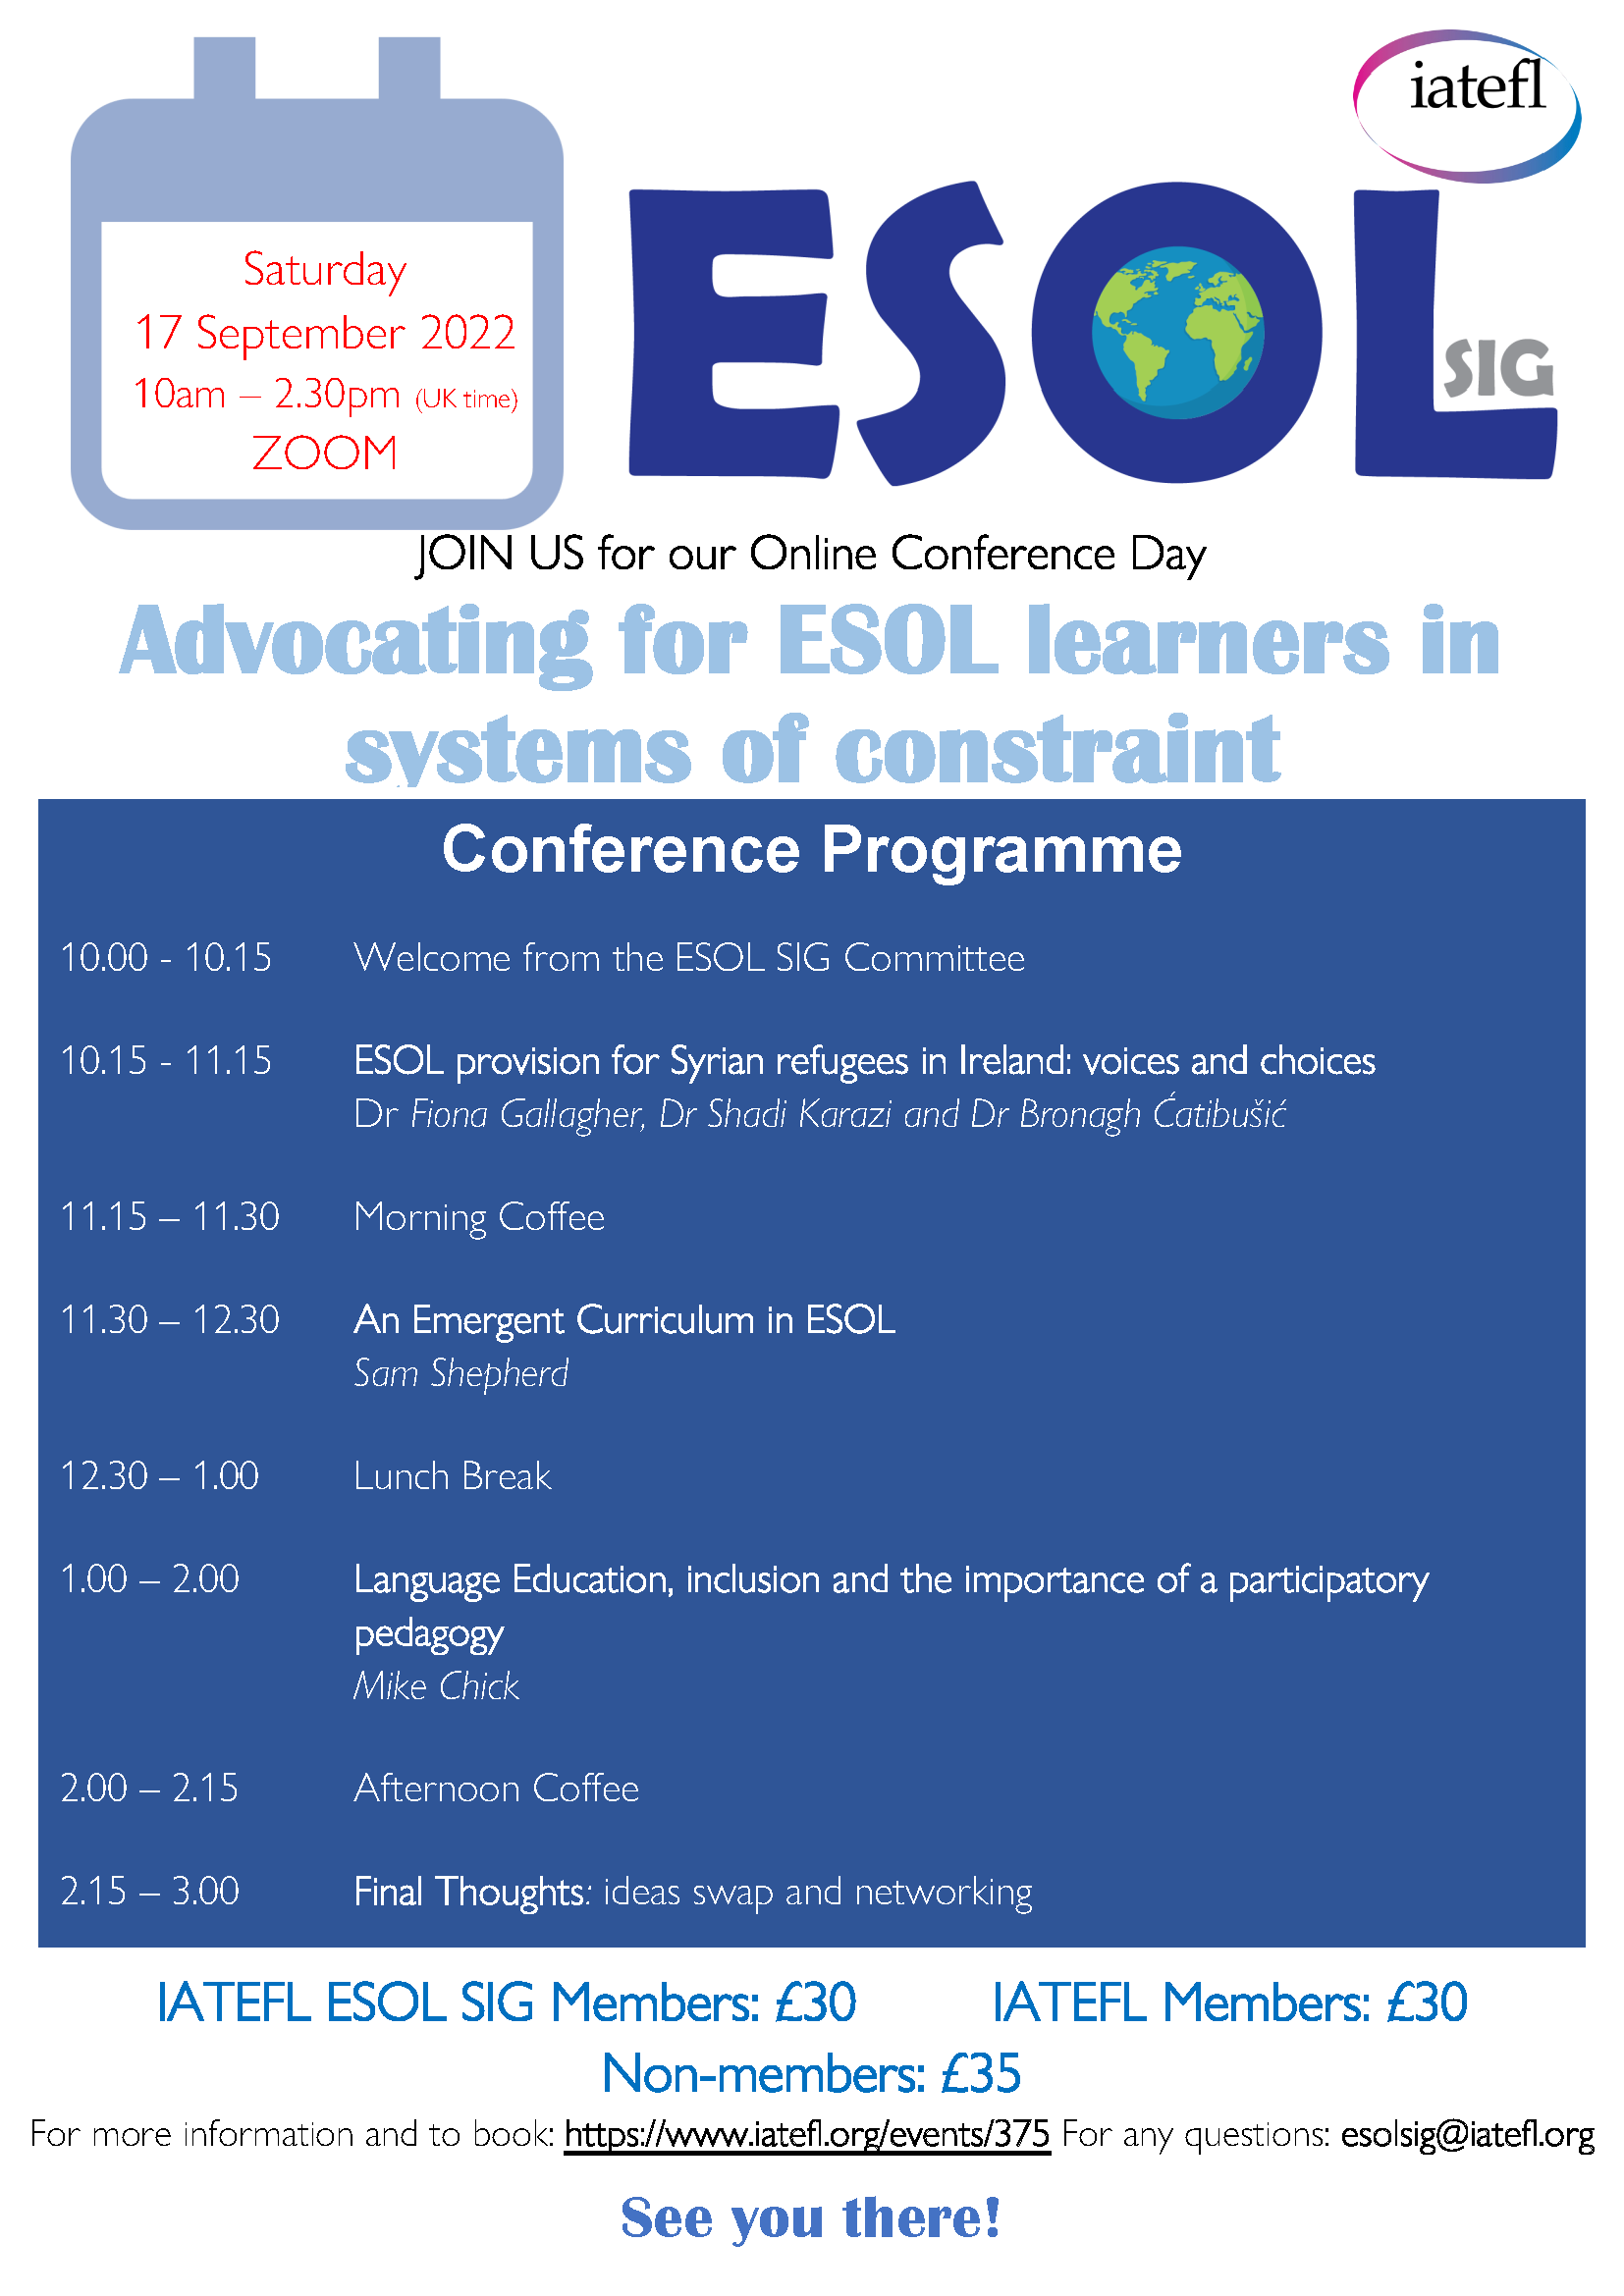 ESOLSIG Advocating for ESOL learners in systems of constraint